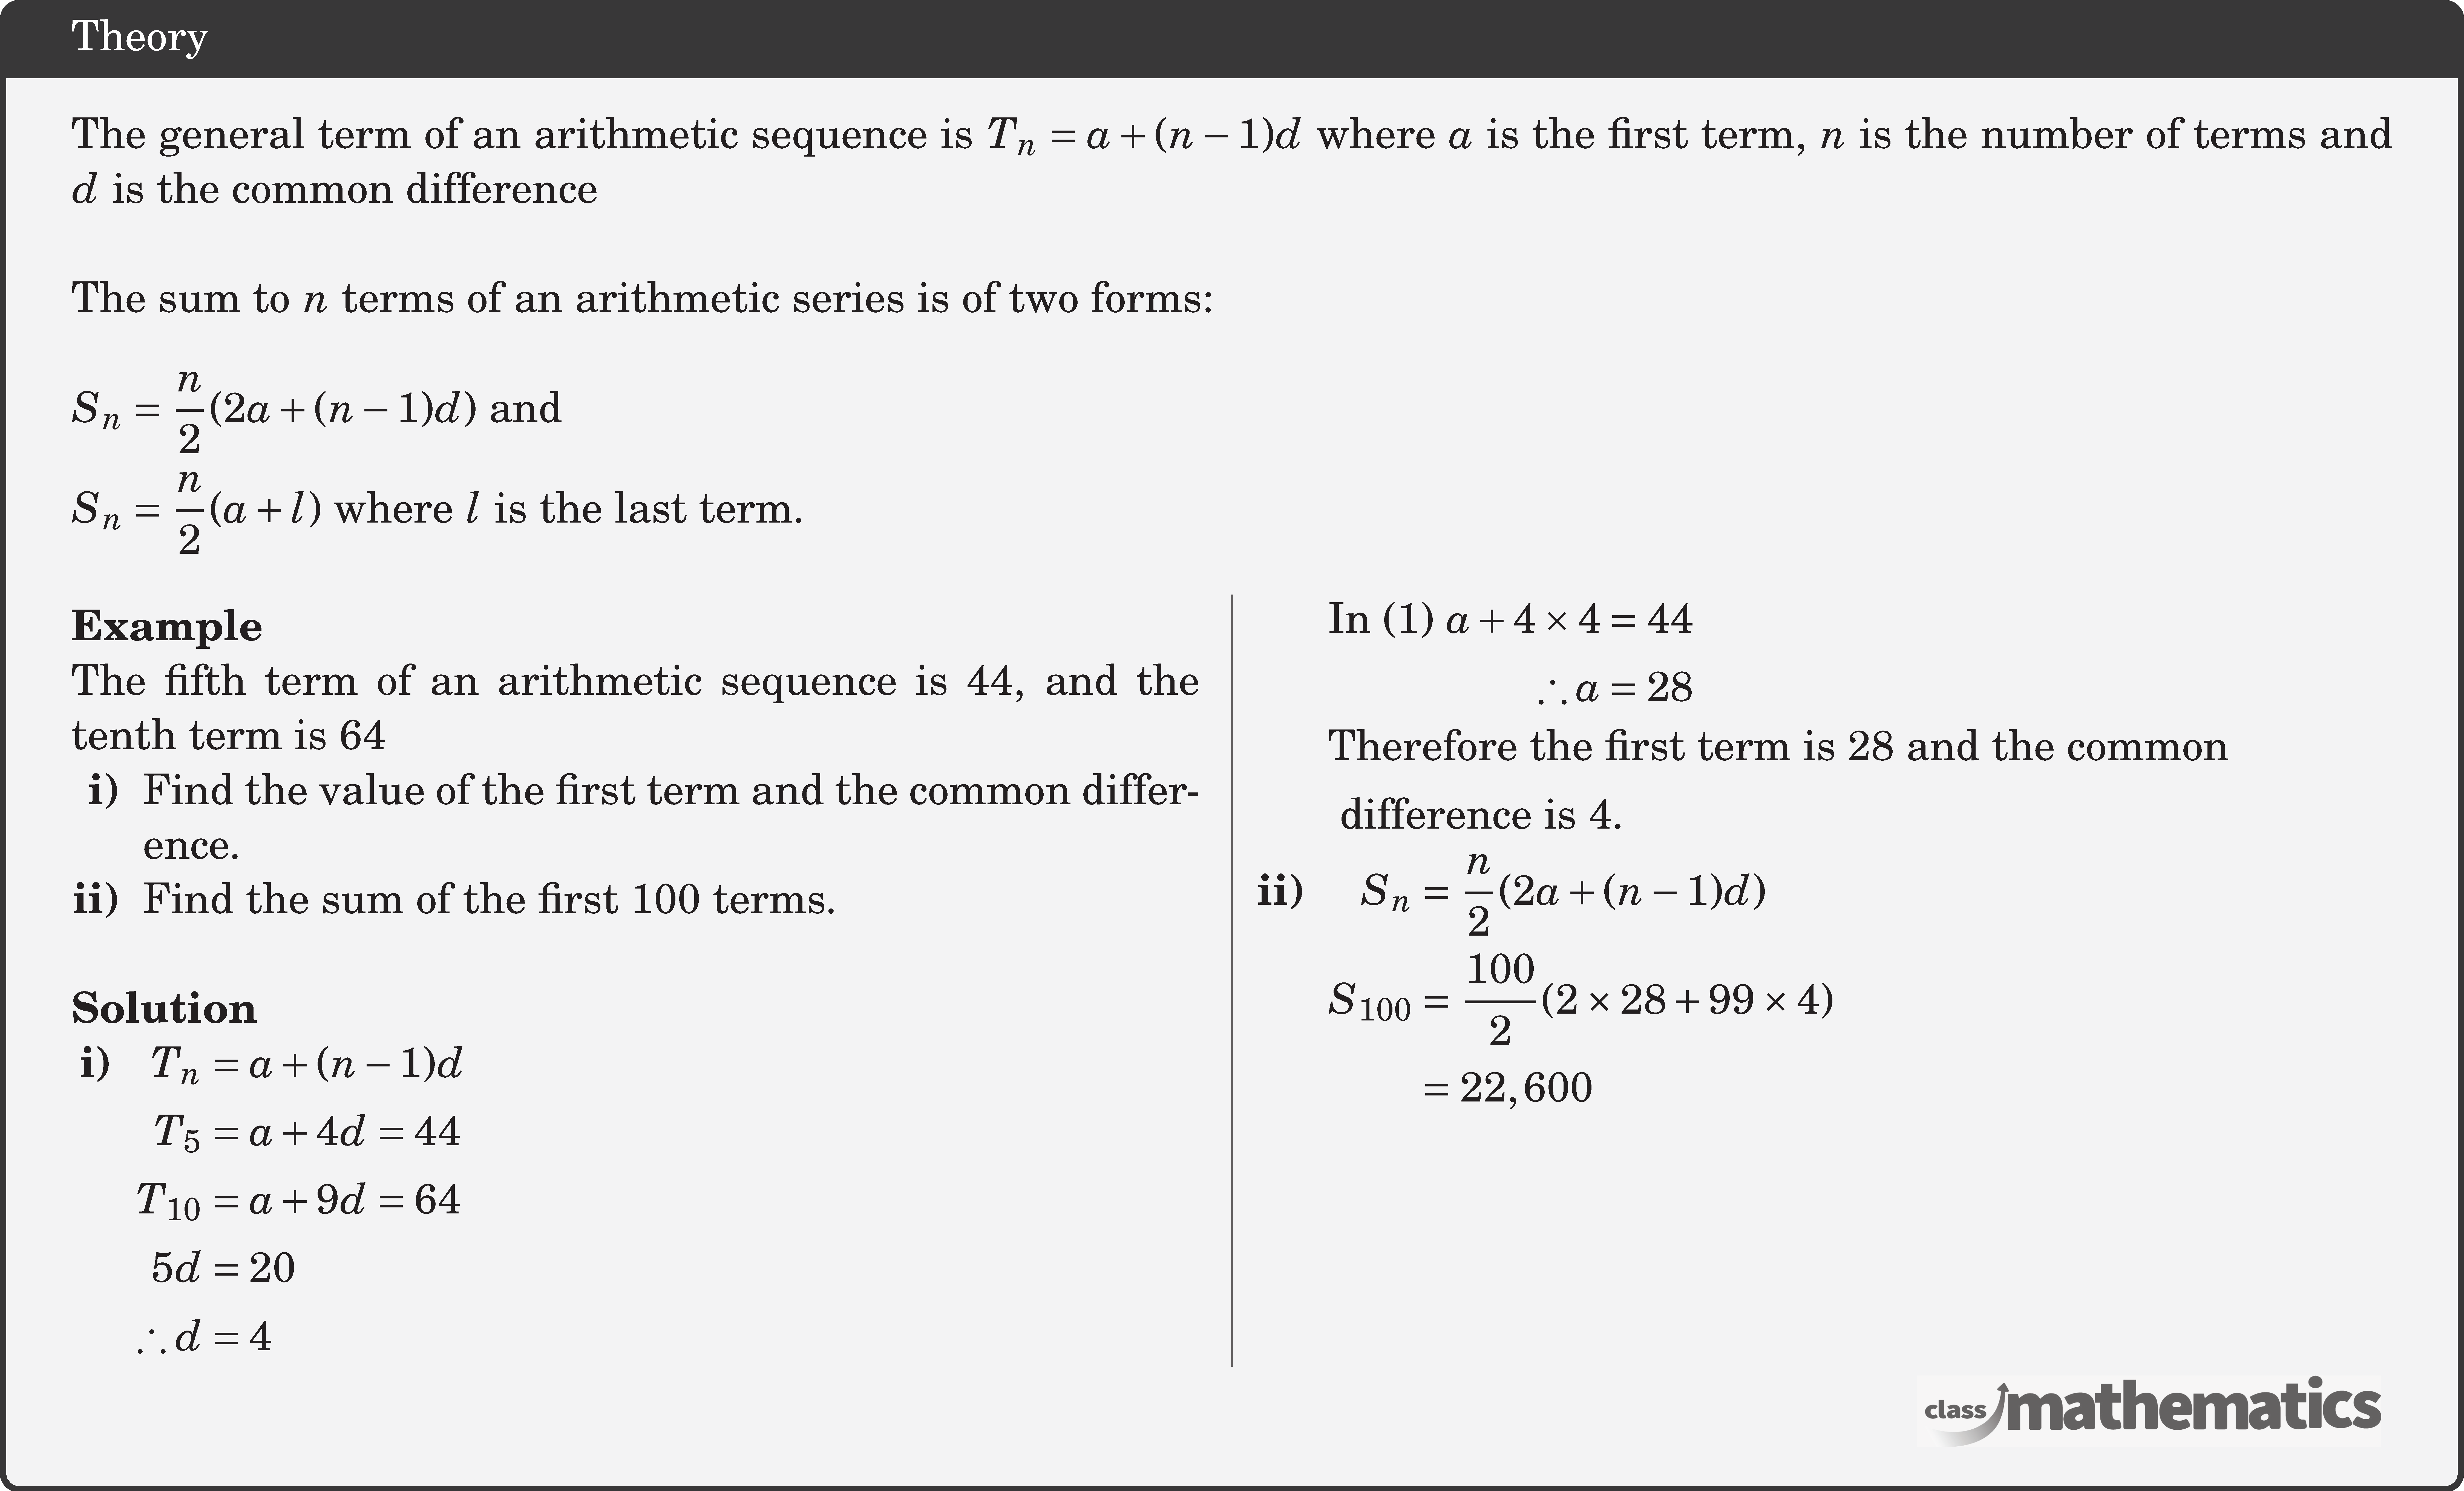 The general term of an arithmetic sequence is \(T_n=a+(n-1) d\) where \(a\) is the first term, \(n\) is the number of terms and \(d\) is the common difference\\  The sum to \(n\) terms of an arithmetic series is of two forms:\\  $\begin{aligned} & S_n=\frac{n}{2}(2 a+(n-1) d) \text { and } \\ & S_n=\frac{n}{2}(a+l) \text { where } l \text { is the last term. } \end{aligned}$\\  \begin{multicols}{2}  \textbf{Example}\\ %24641 The fifth term of an arithmetic sequence is 44, and the tenth term is 64  \begin{itemize}[leftmargin=1.7em,nosep] \item[\bf{i)}]Find the value of the first term and the common difference.  \item[\bf{ii)}]Find the sum of the first 100 terms. \end{itemize} \hfill \linebreak \textbf{Solution} \begin{itemize}[leftmargin=1.5em,nosep] \item[\bf{i)}] \(\begin{aligned}[t] T_{n} &=a+(n-1) d \\ T_{5} &=a+4 d=44 \\ T_{10} &=a+9 d=64 \\ 5 d &=20 \\ \therefore d &=4  \end{aligned}\)\\ \(\begin{aligned} \text {In (1) } a+4 \times 4 &=44 \\ \therefore a &=28 \end{aligned}\)\\ \(\begin{aligned} &\text{Therefore the first term is 28 and the common} \\&\text{ difference is 4.} \end{aligned}\)\\ \item[\textbf{ii)}]  \(\begin{aligned}[t] S_{n} &=\frac{n}{2}(2 a+(n-1) d) \\ S_{100} &=\frac{100}{2}(2 \times 28+99 \times 4) \\  &=22,600 \end{aligned}\) \end{itemize} \end{multicols}